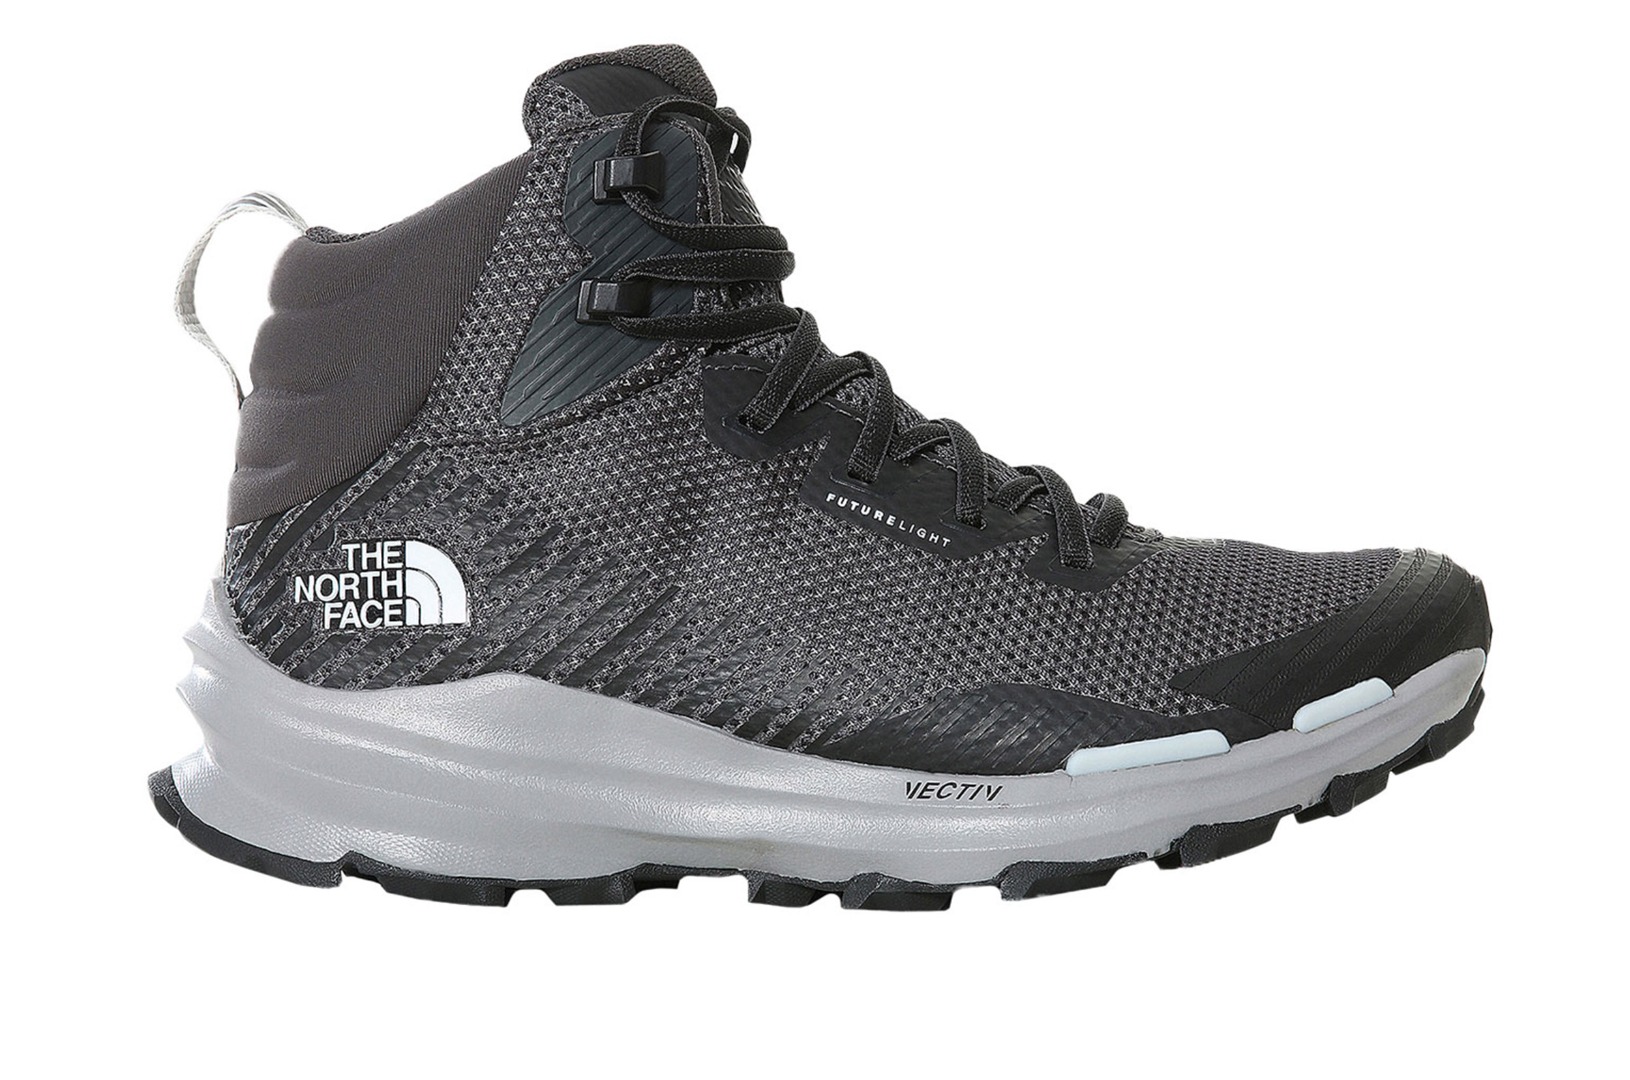 THE NORTH FACE W VECTIV FASTPACK MID FUTURELIGHT NF0A5JCXMN8-MN8 Ανθρακί